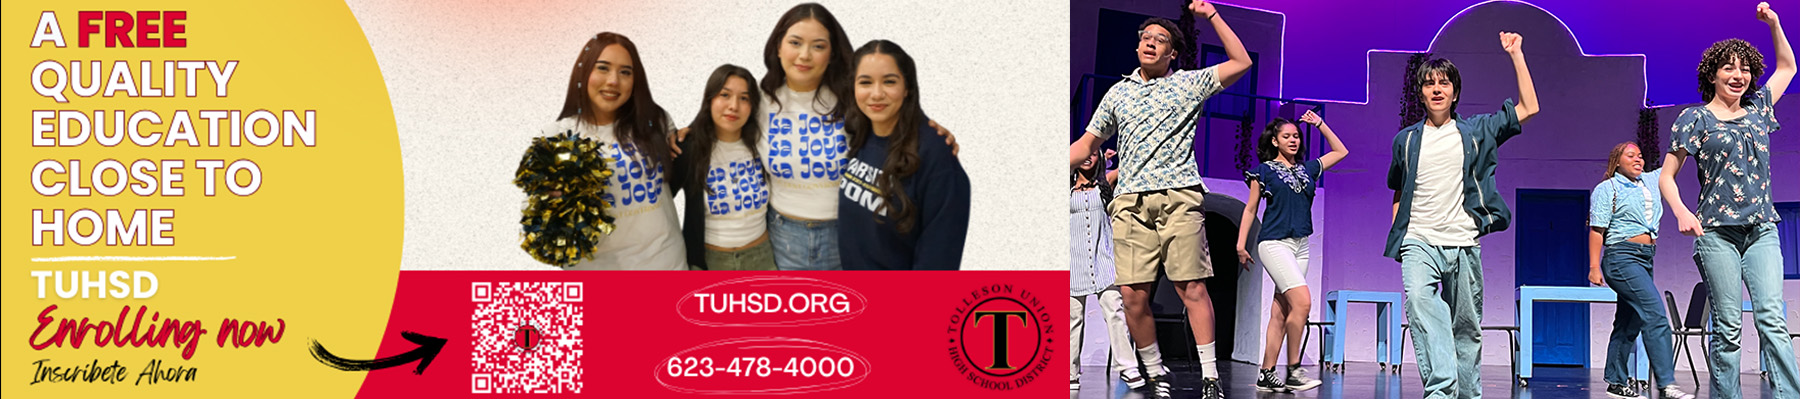 SUPPORT OUR SCHOOLS WITH A TAX CREDIT DONATION! Single person donation of $200 or married joint filing donation of $400 Remember TUHSD when you're filing your taxes! | Group of students holding certificates